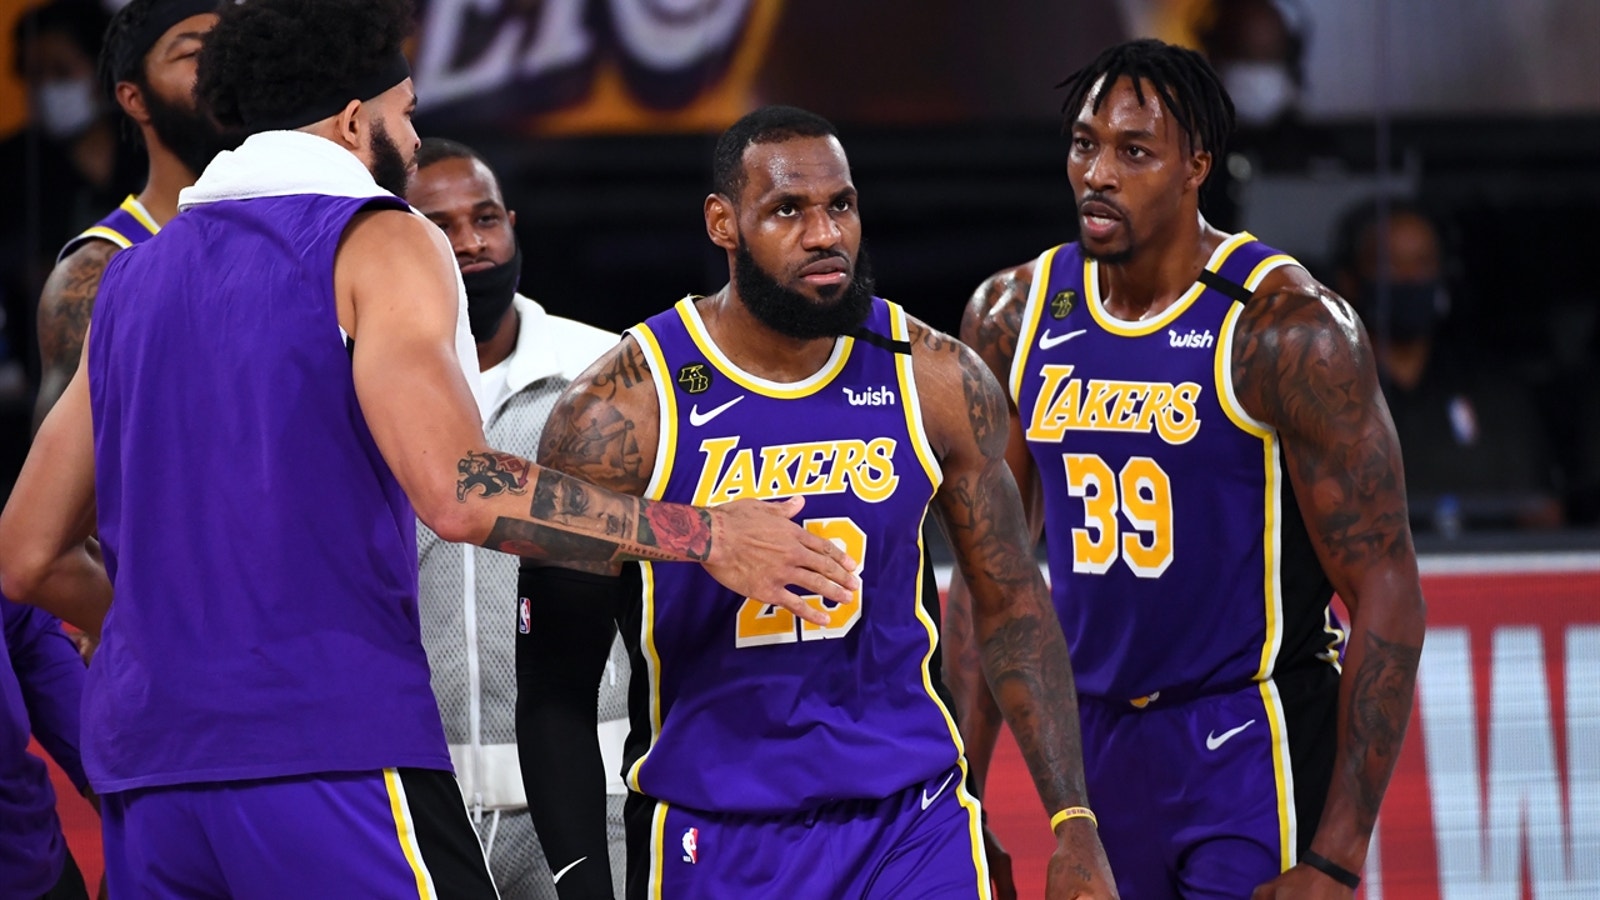 Shannon Sharpe gives his prediction for Lakers vs. Heat in the 2020 NBA Finals | UNDISPUTED